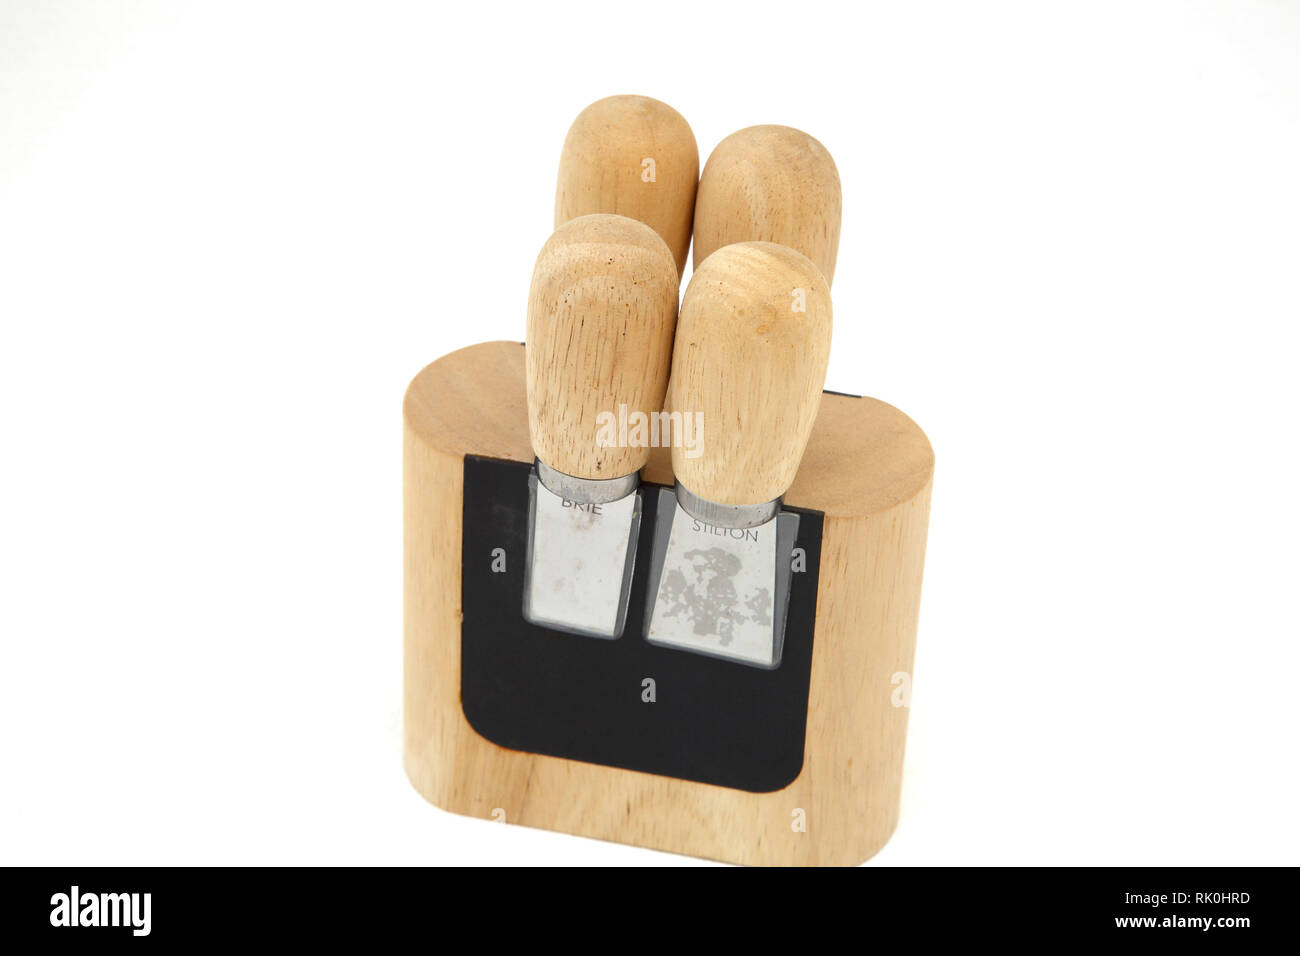 Set of Cheese Knives on a Magnetic Block Stock Photo